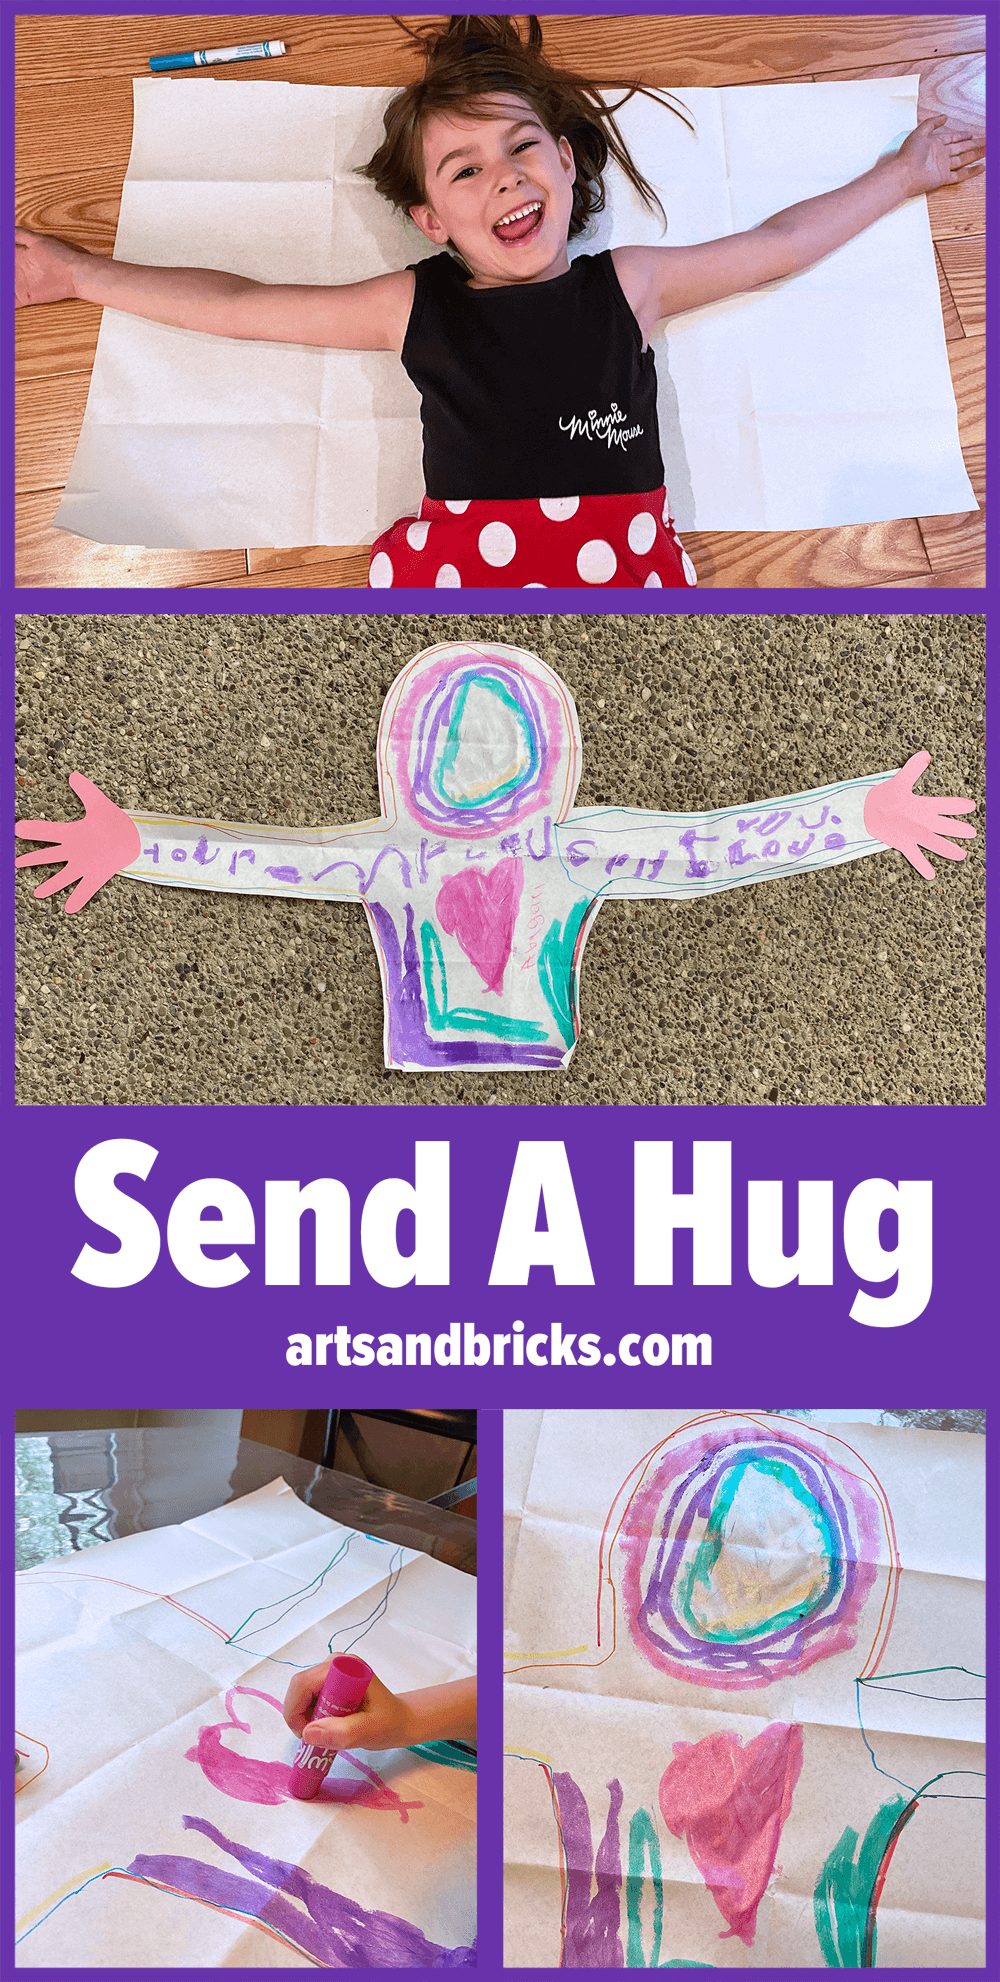 Brighten someone's day! Send a hug from your child. This simple family-friendly craft is perfect for quarantine, grandparents day, deployed parents and more! Get inspired and learn how to create your own from our blog.